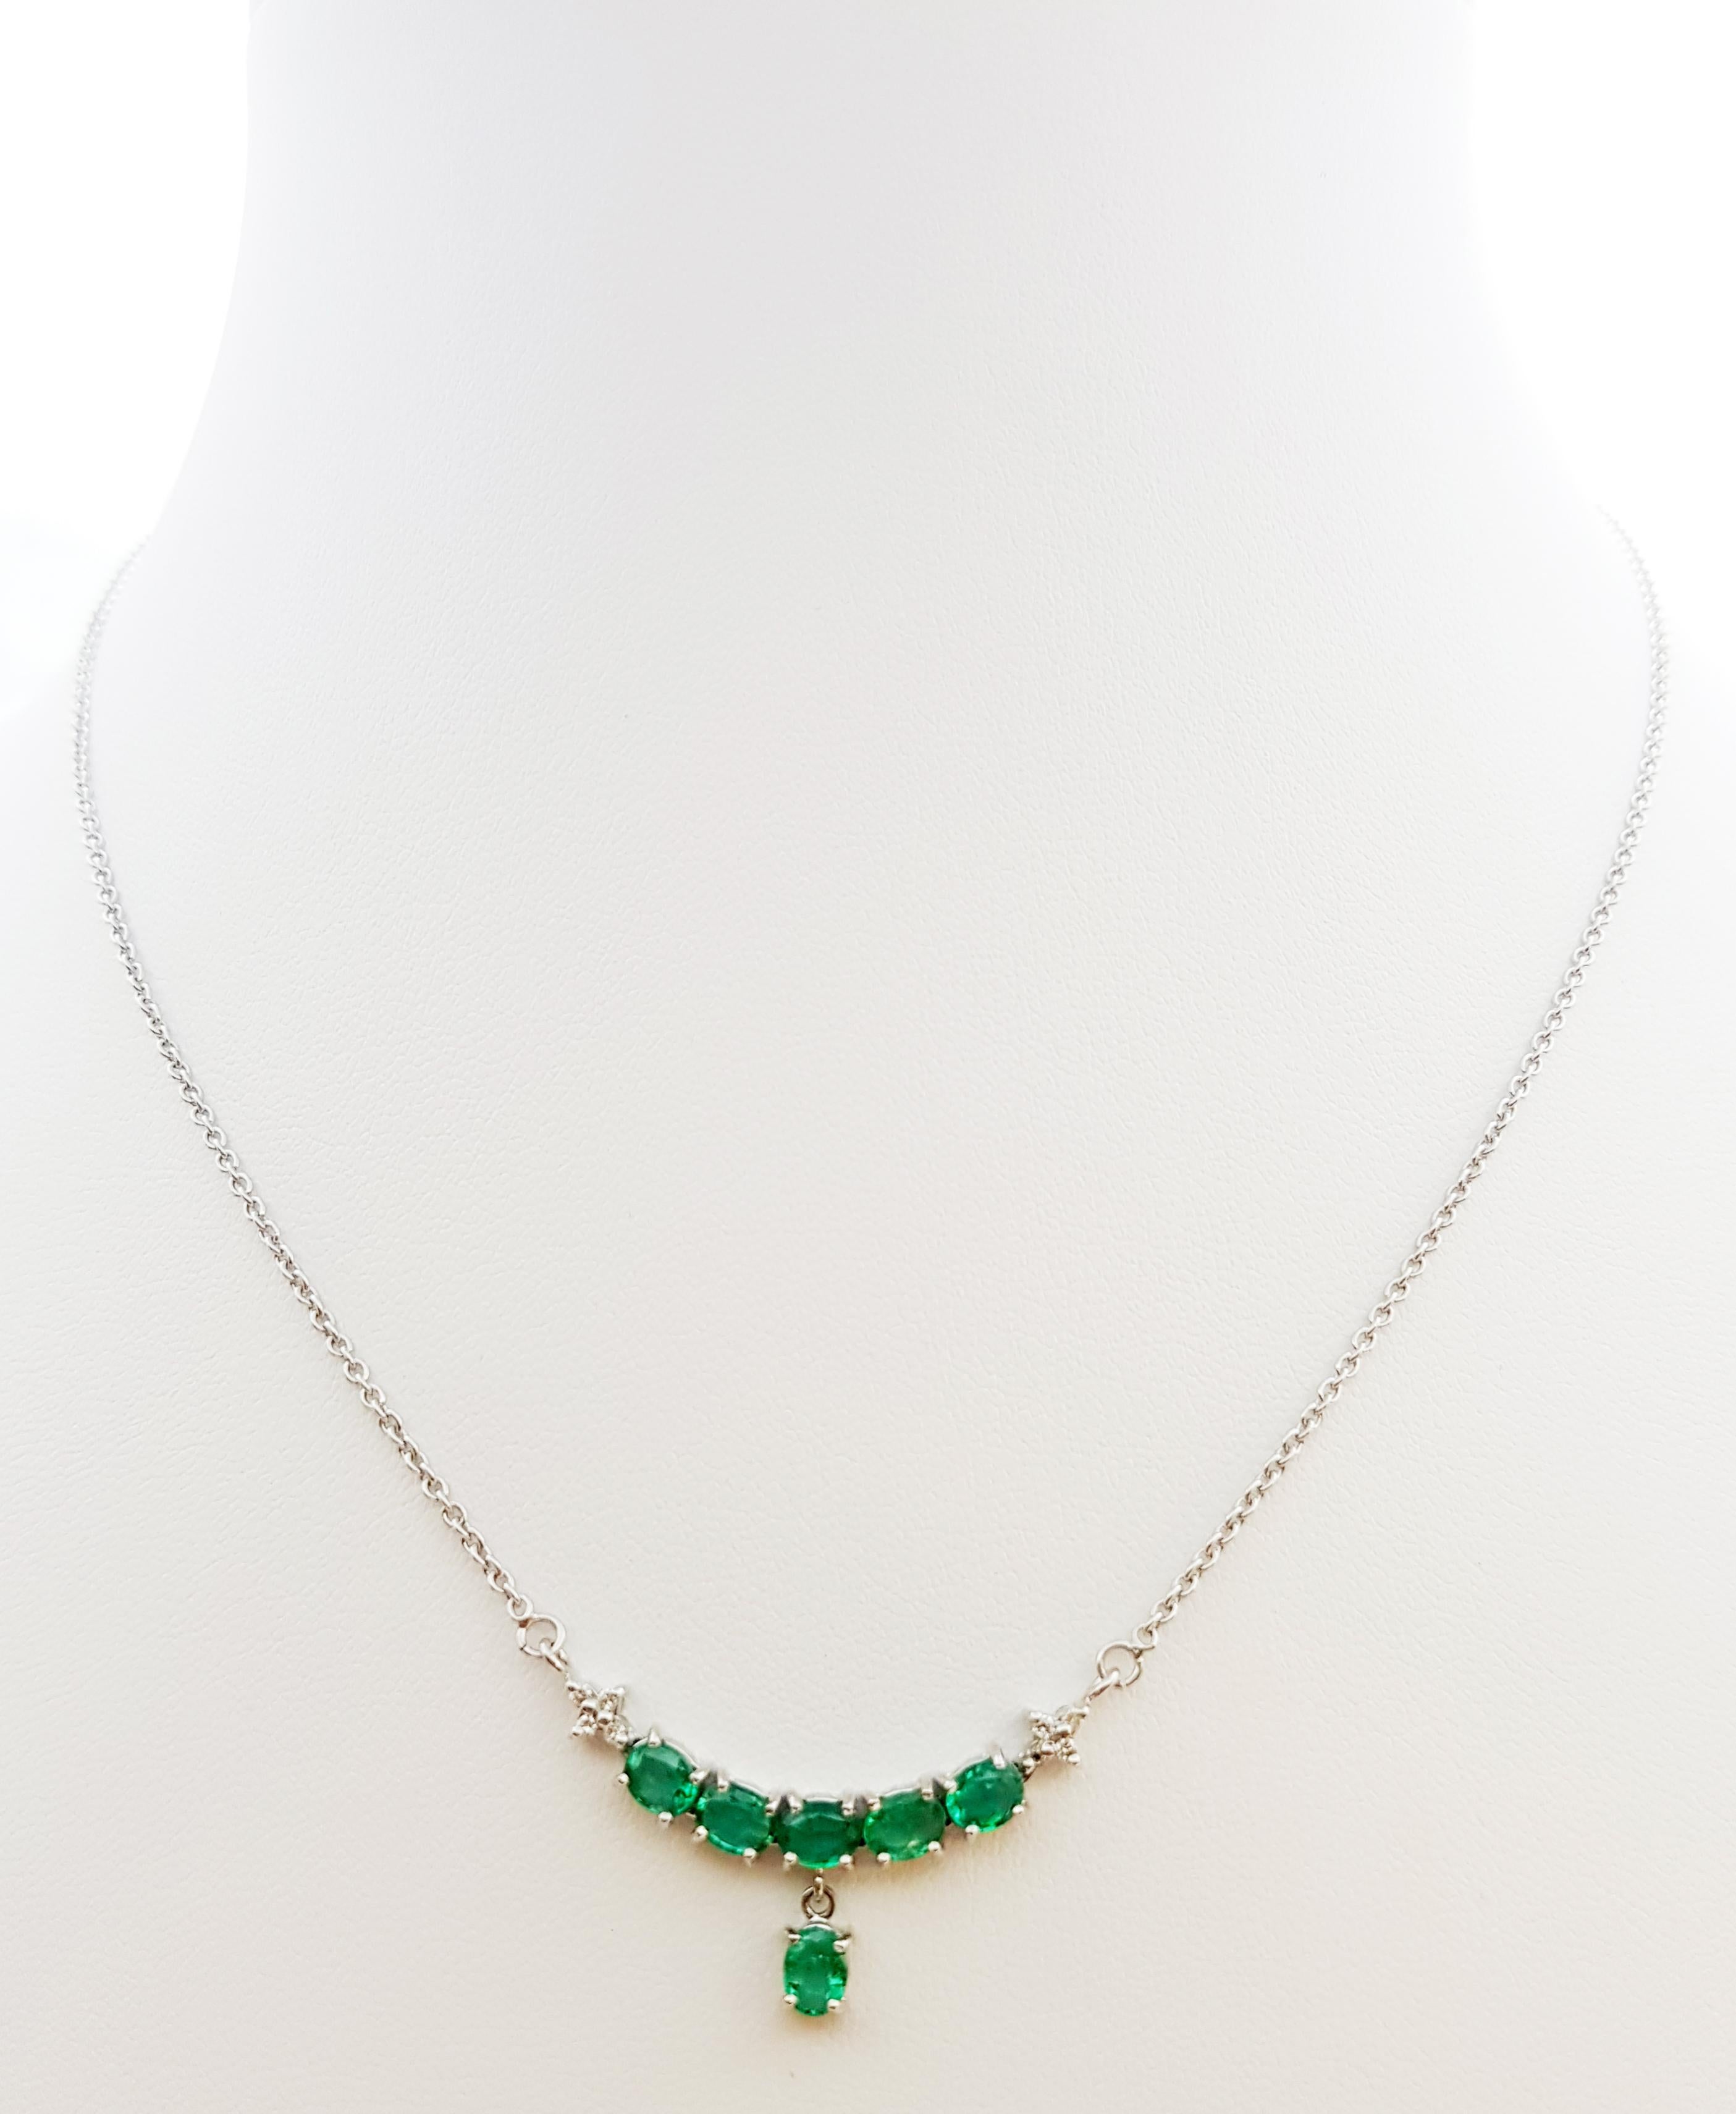 Emerald 1.30 carats with Diamond 0.06 carat Necklace set in 18 Karat  White Gold Settings

Width: 1.2 cm 
Length: 45.0 cm
Total Weight: 5.27 grams

